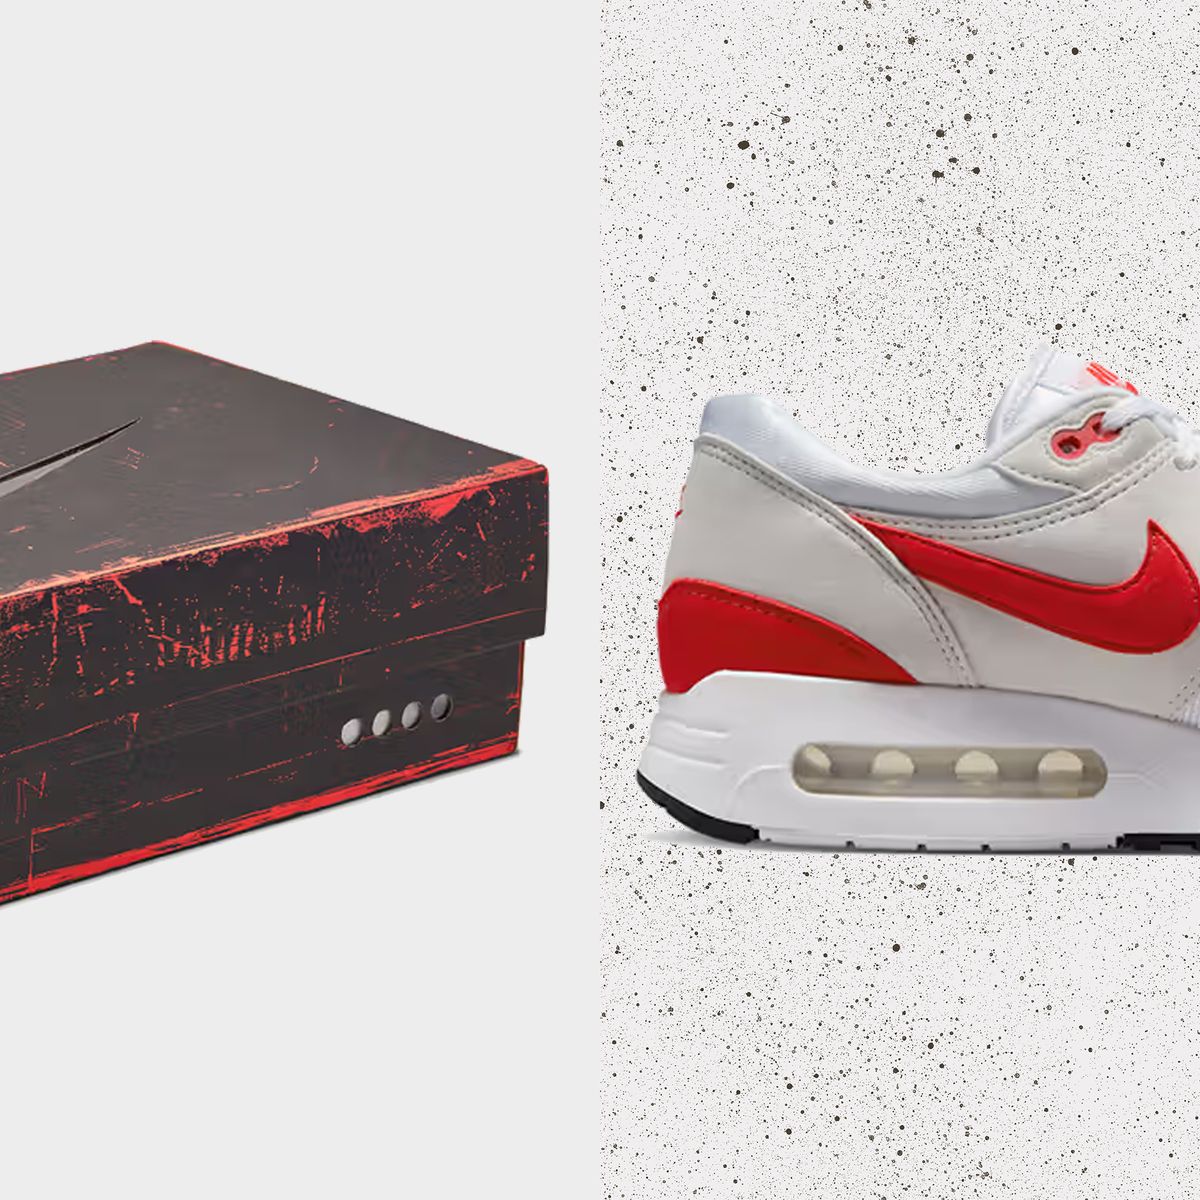 voetstuk Geen spade Air Max Day 2023: What You Need to Know About the Nike Event